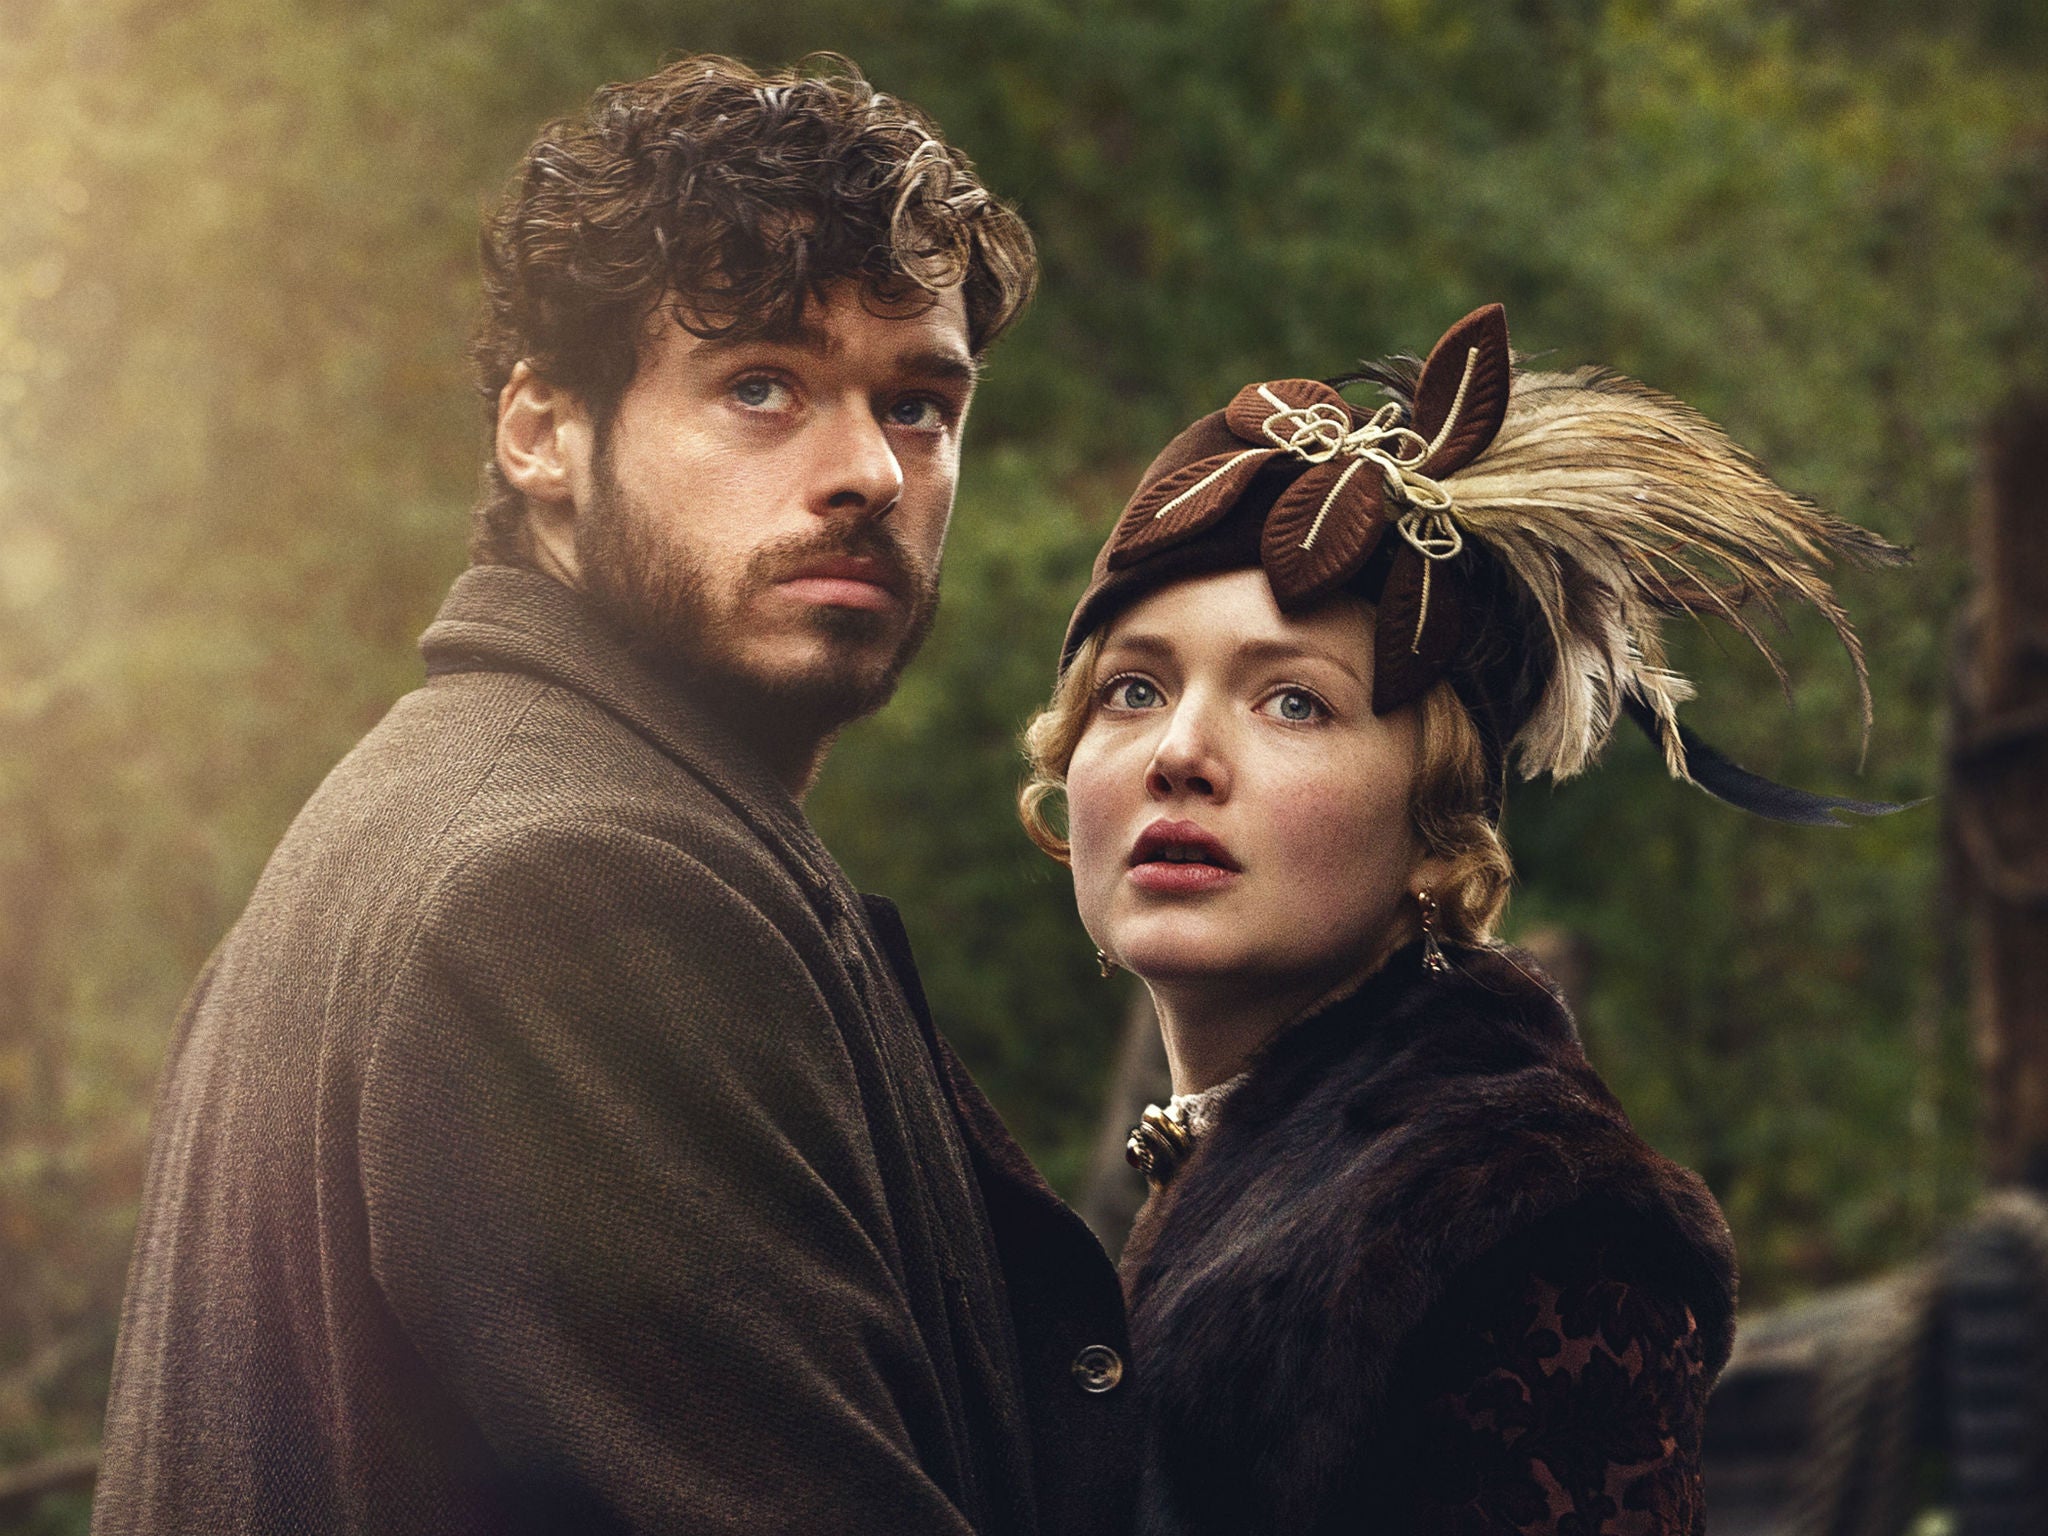 Holliday Grainger and Richard Madden as Lady Chatterley and Oliver Mellors in Lady Chatterley's Lover